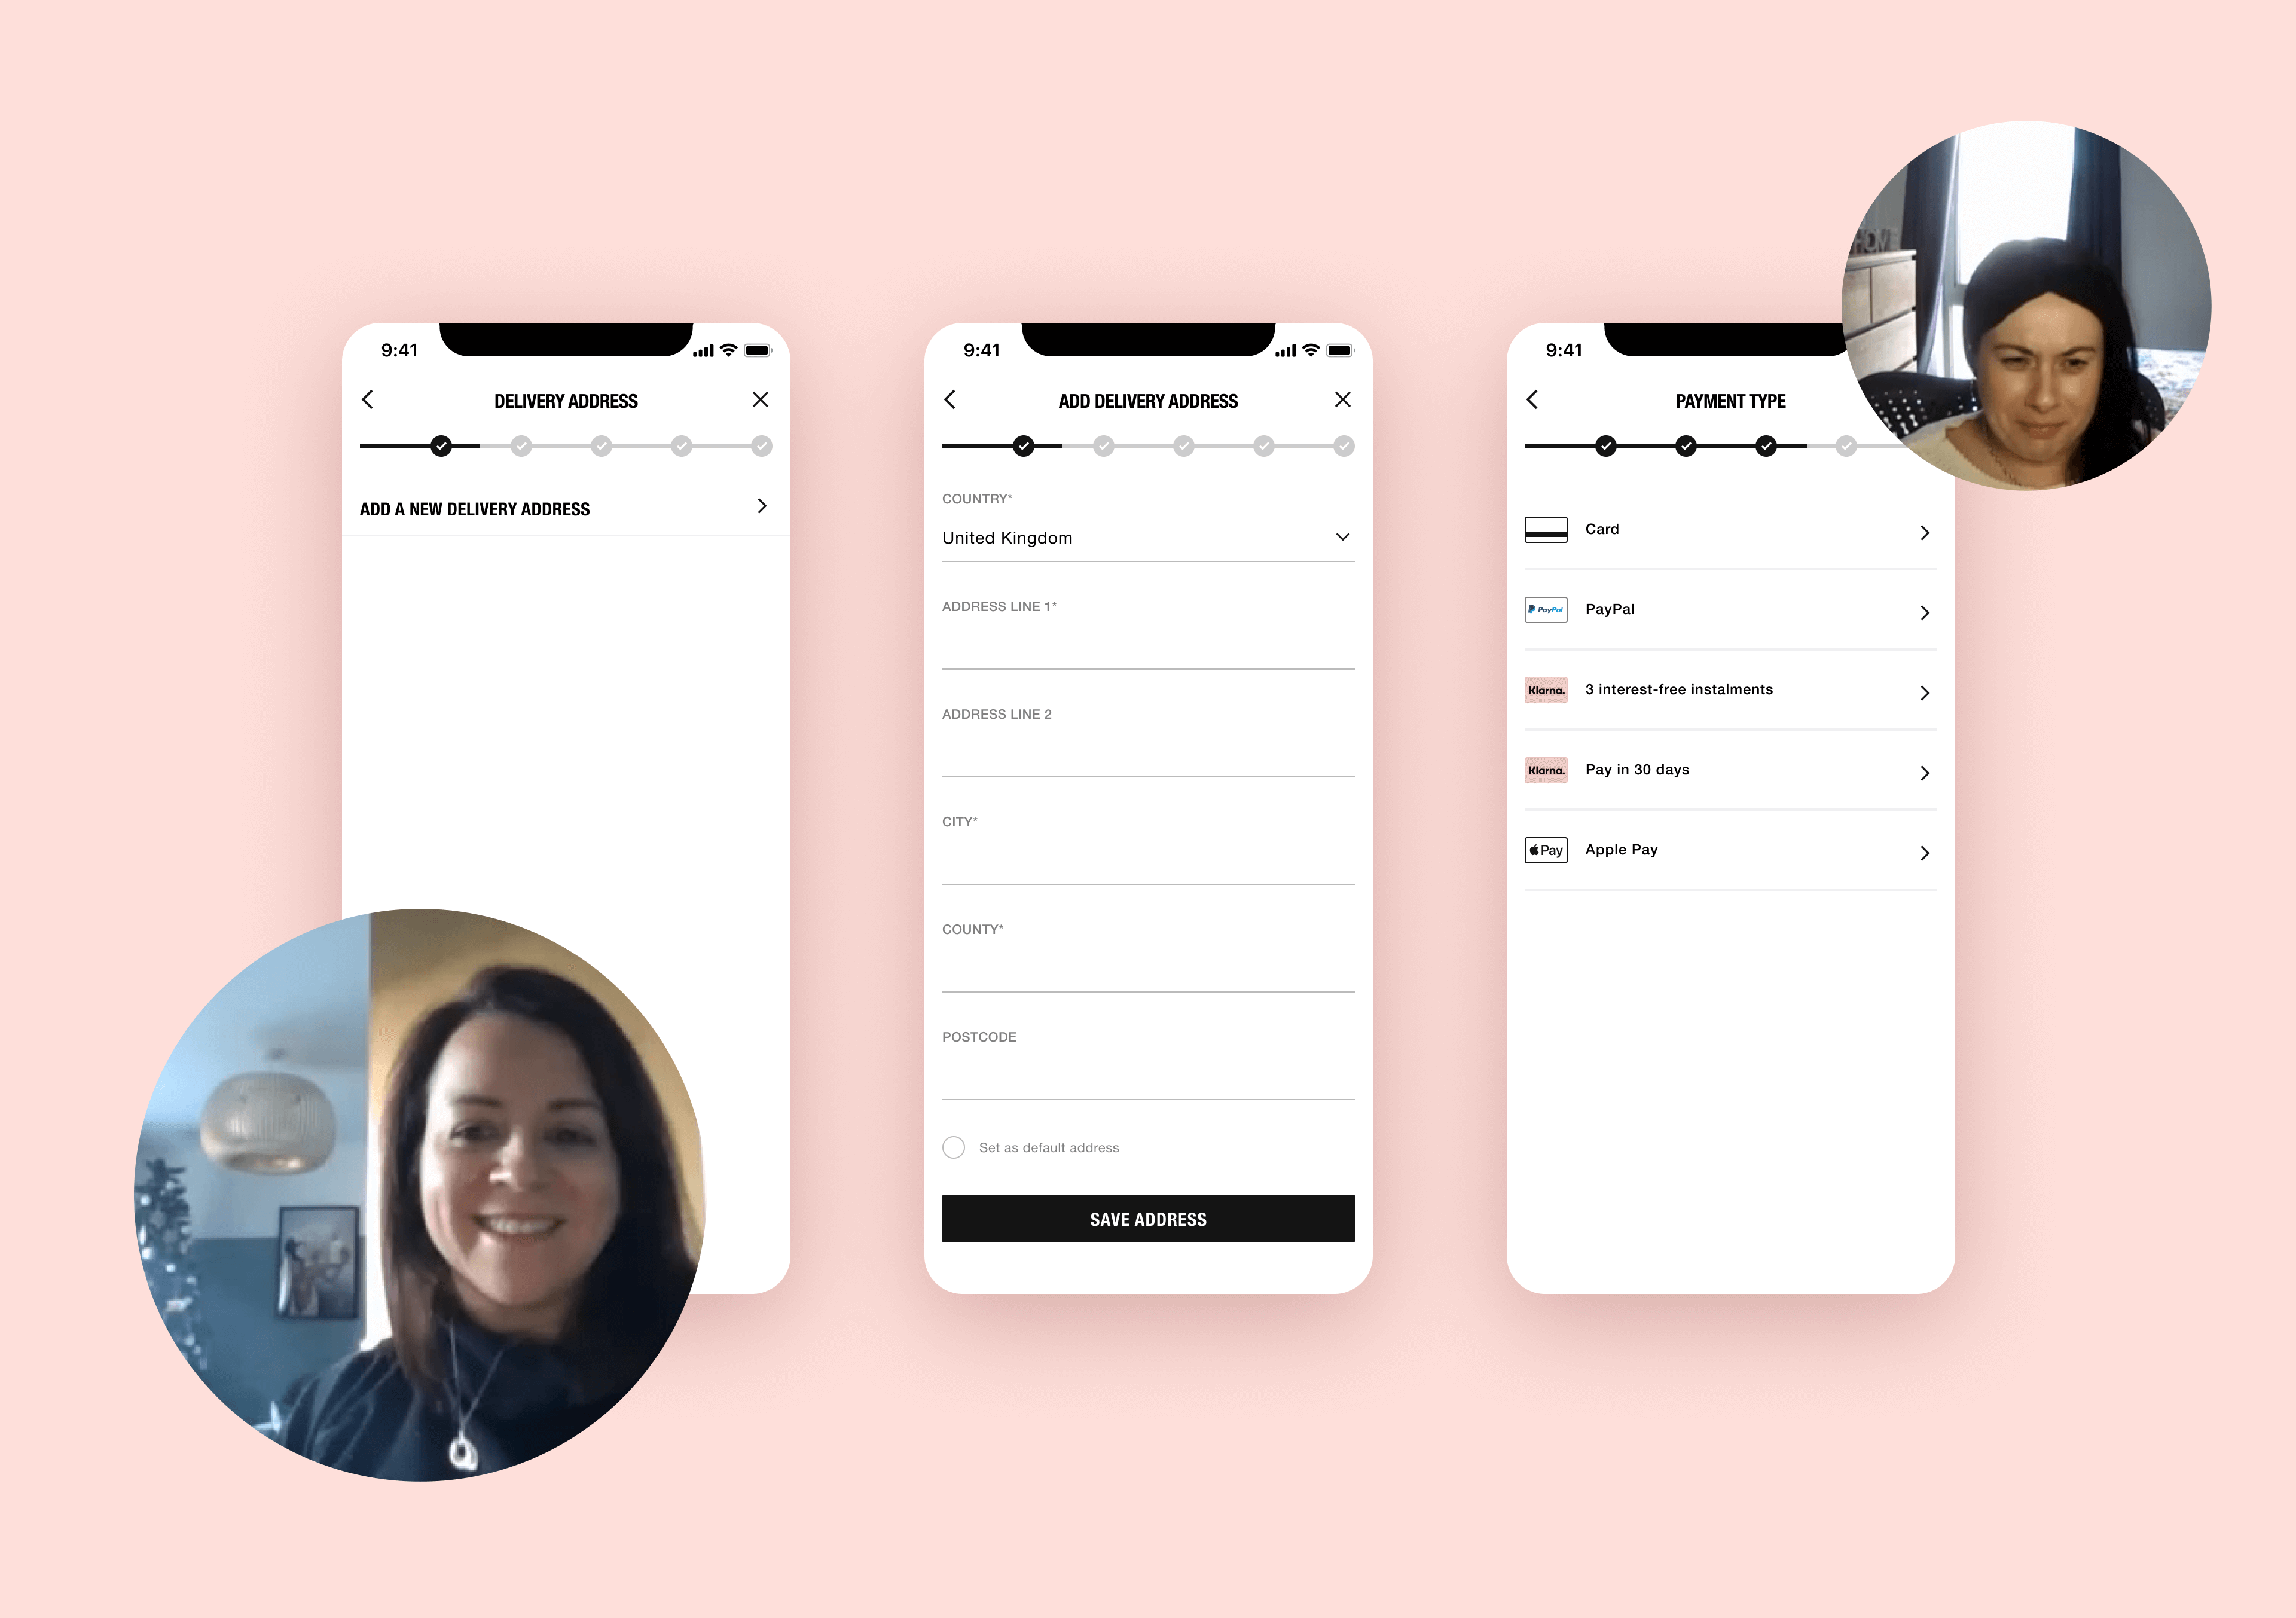 Usability test with users of the Missguided mobile app